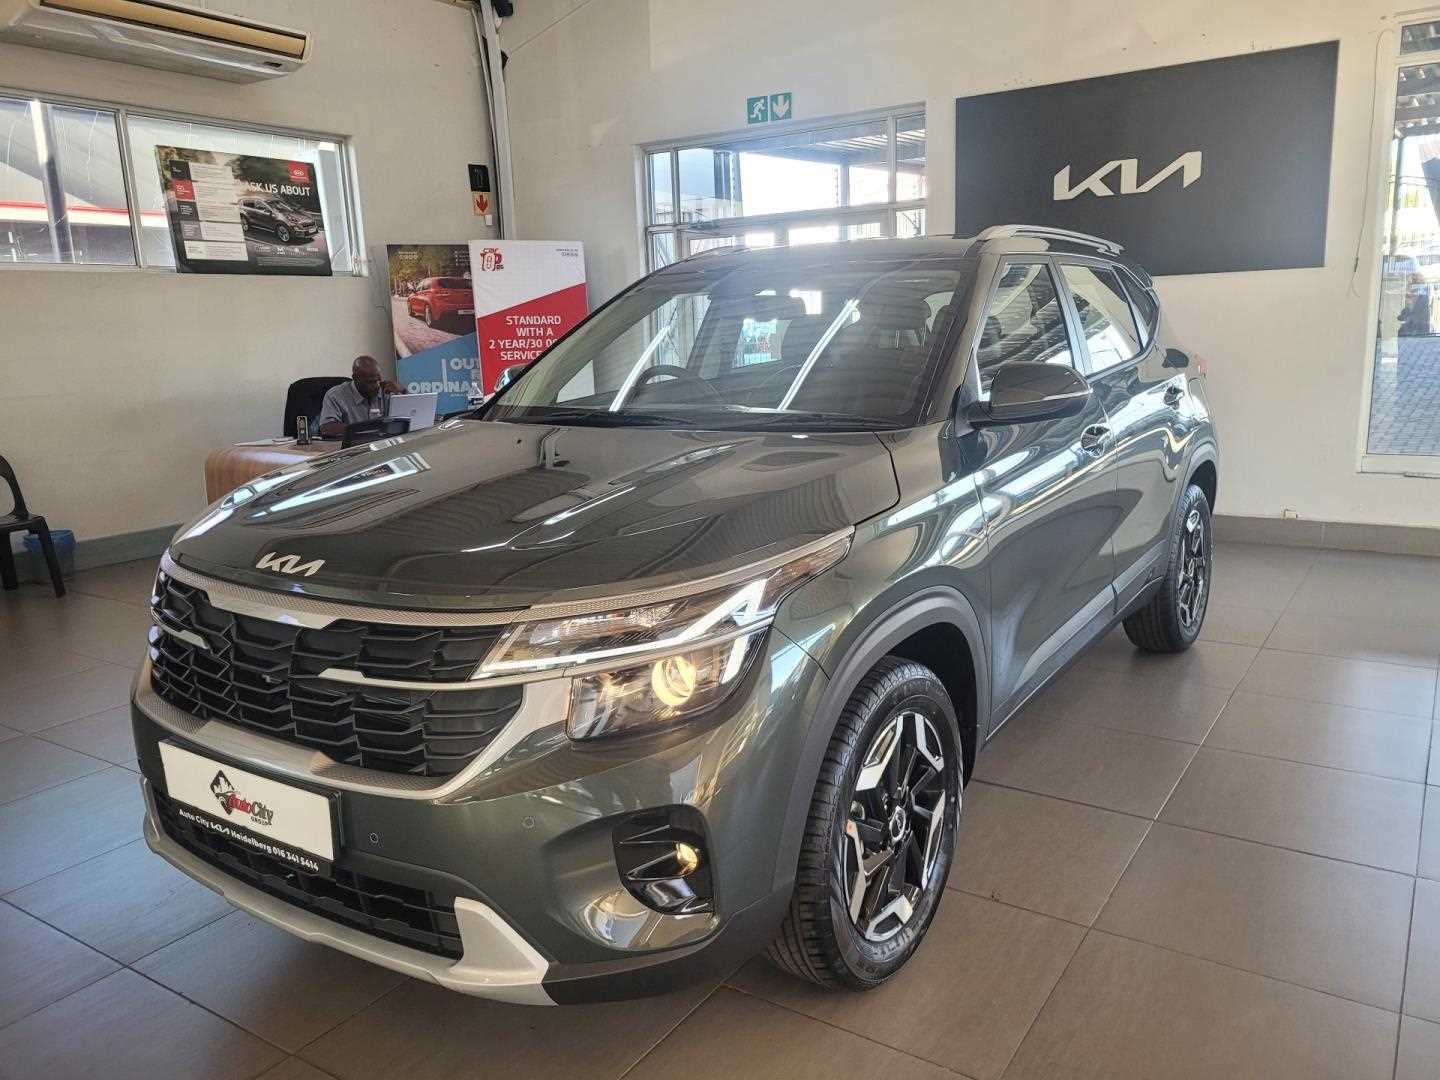 KIA SELTOS 1.5 EX CVT for Sale in South Africa